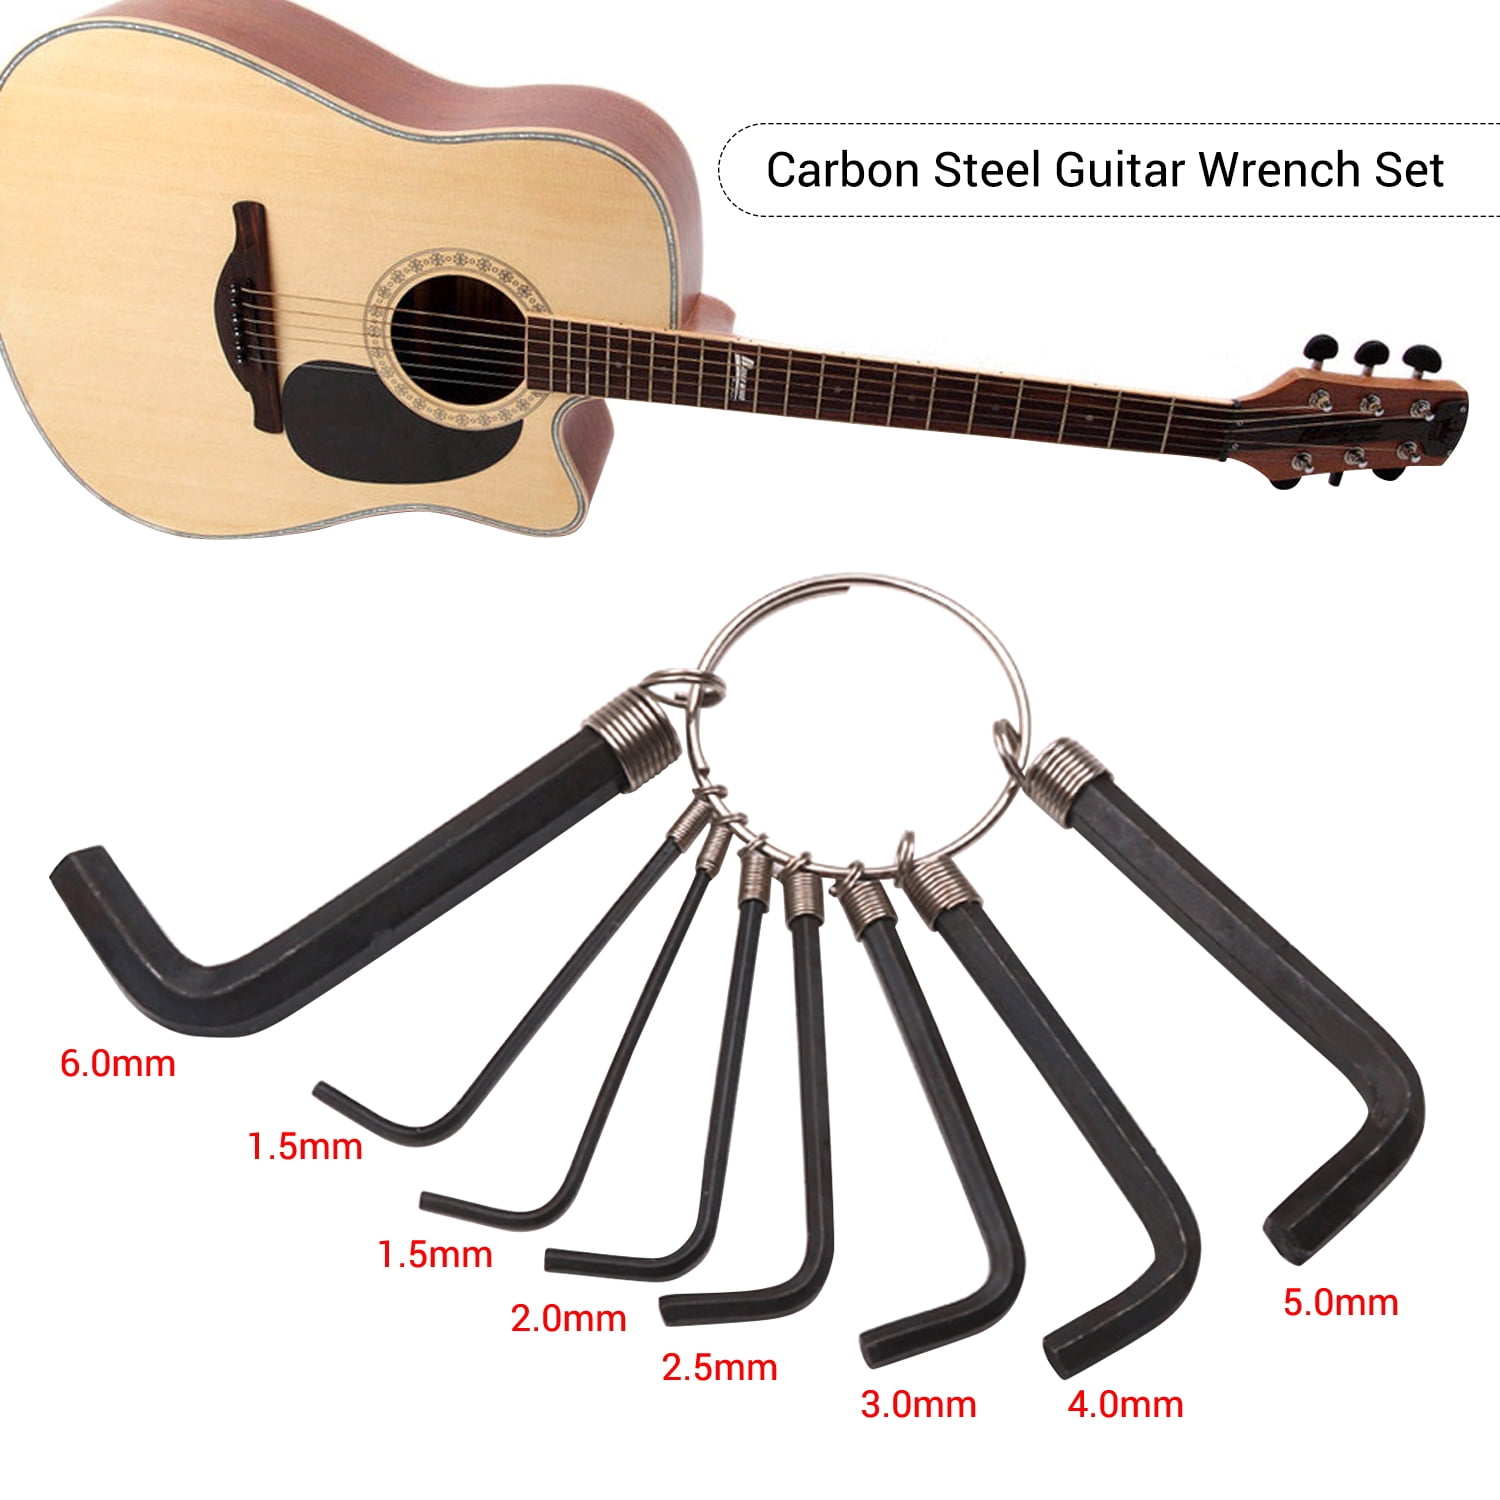 Bass And Ukulele For Guitar Bass And Ukulele. Guitar Allen Wrench Wear-resistant And Durable For Guitar 